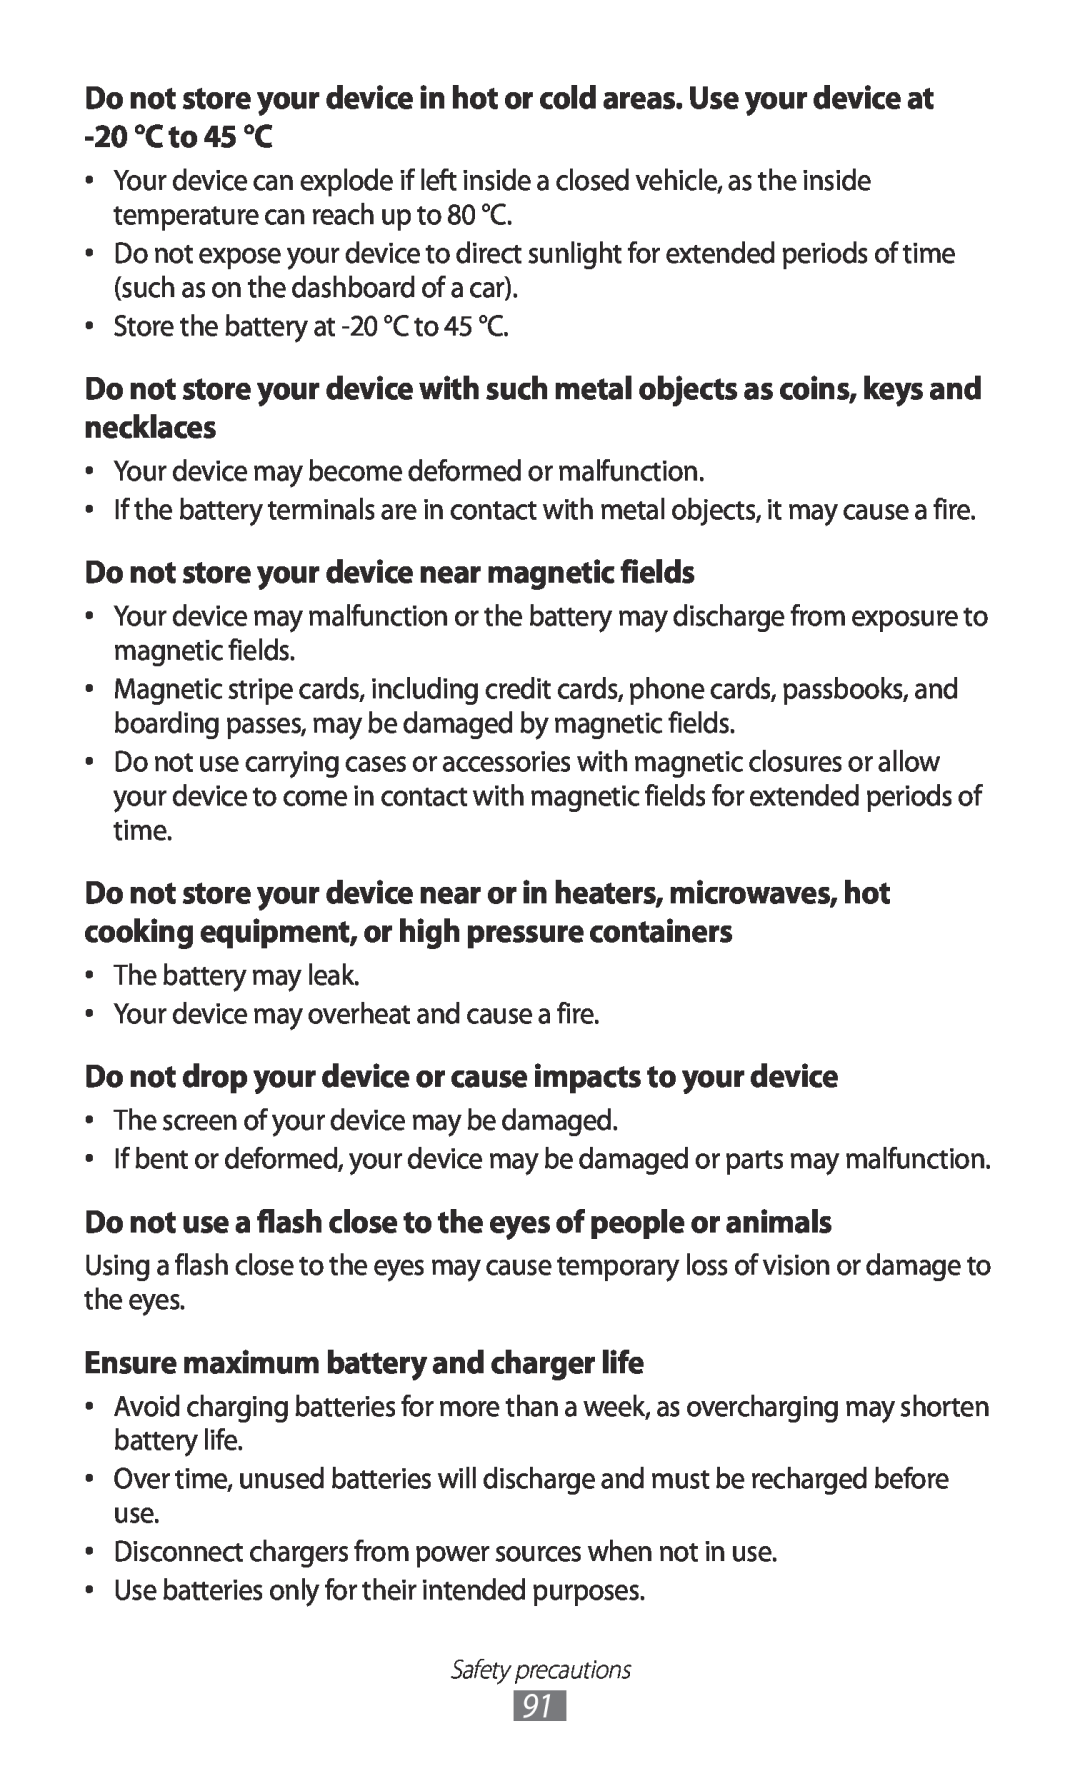 Samsung GT-P7510 Do not store your device near magnetic fields, Do not drop your device or cause impacts to your device 